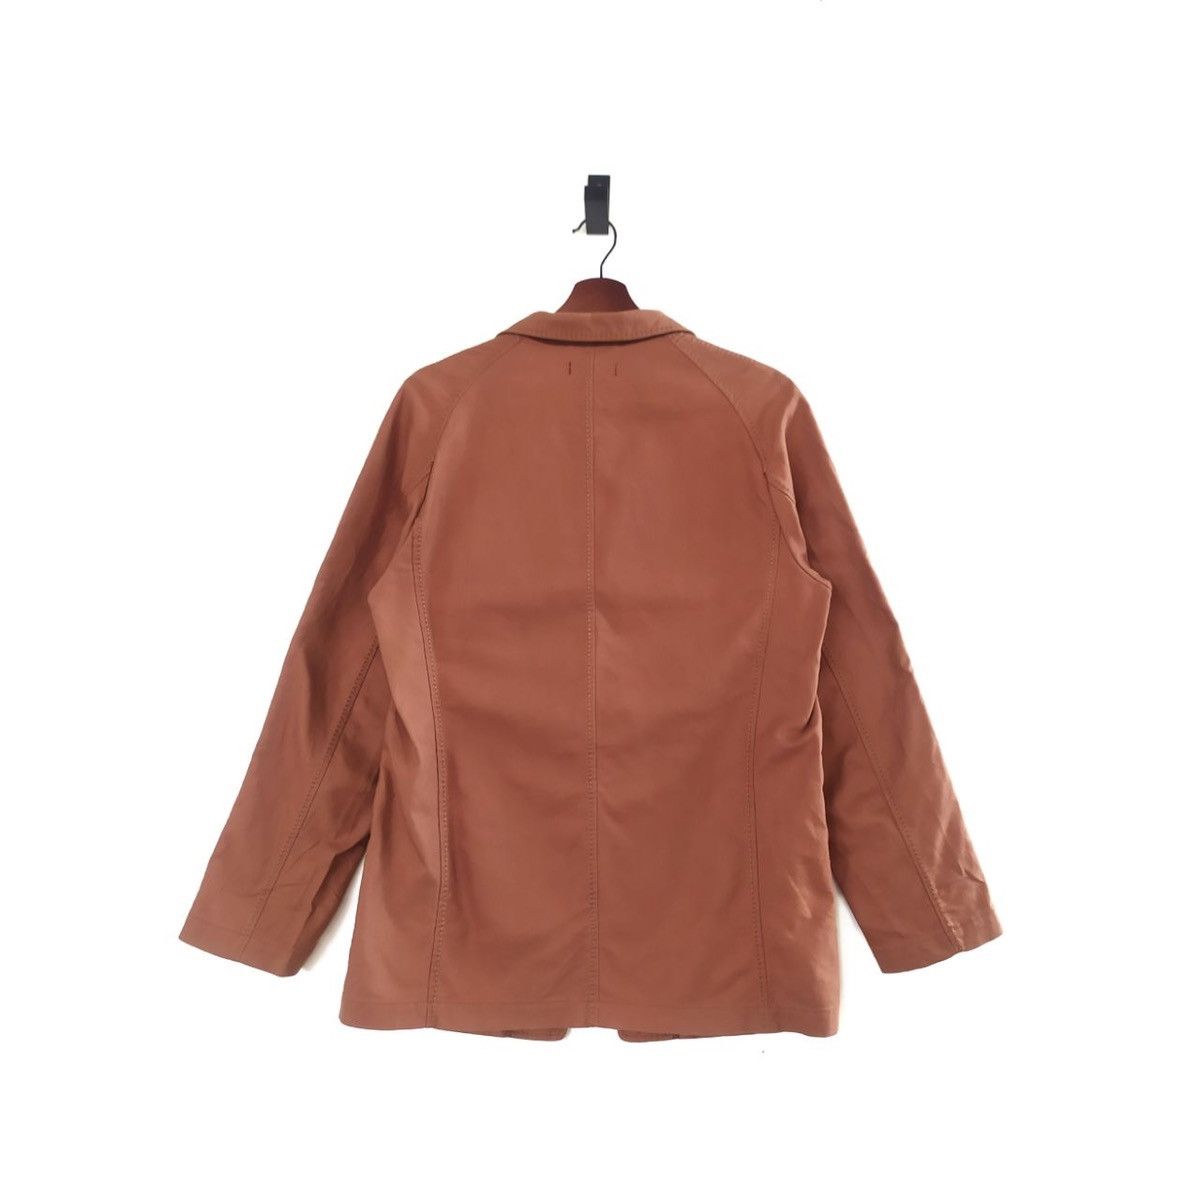 Blue Label by United Arrows Chore Jacket - 3